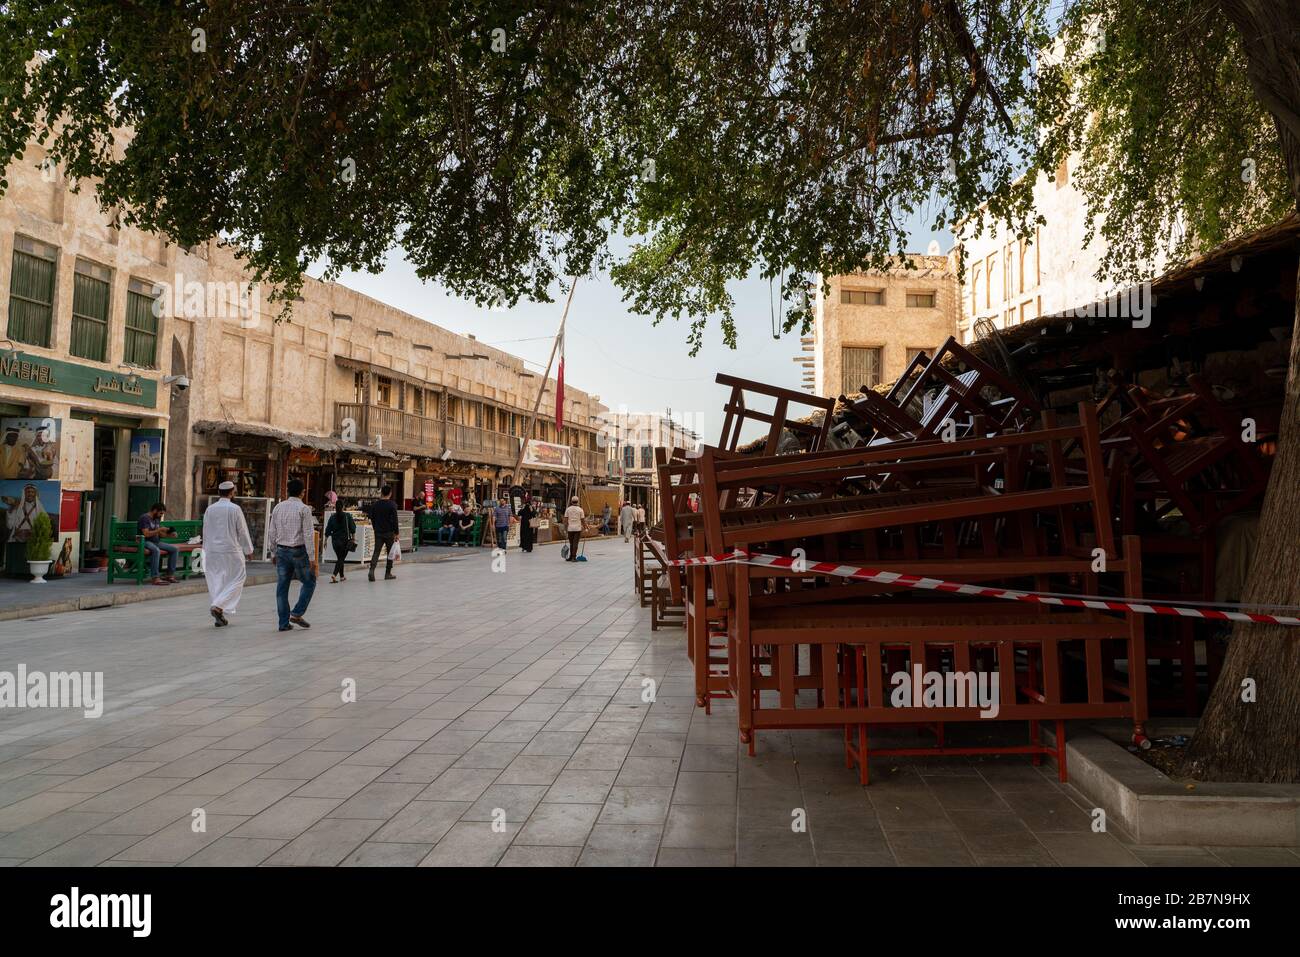 Souq Waqif, one of Doha's tourism landmarks, usually full with people, now has few visitors. Qatar has implemented a series of measures aimed at containing the outbreak of the novel coronavirus in the country. Measures include closing of schools and universities, a temporary ban on inbound flights and banning dinning at restaurants and cafes. An economic and financial package will provide incentives amounting to 75 billion Qatari riyals ($23bn) to help support the private business sector during the outbreak. Stock Photo